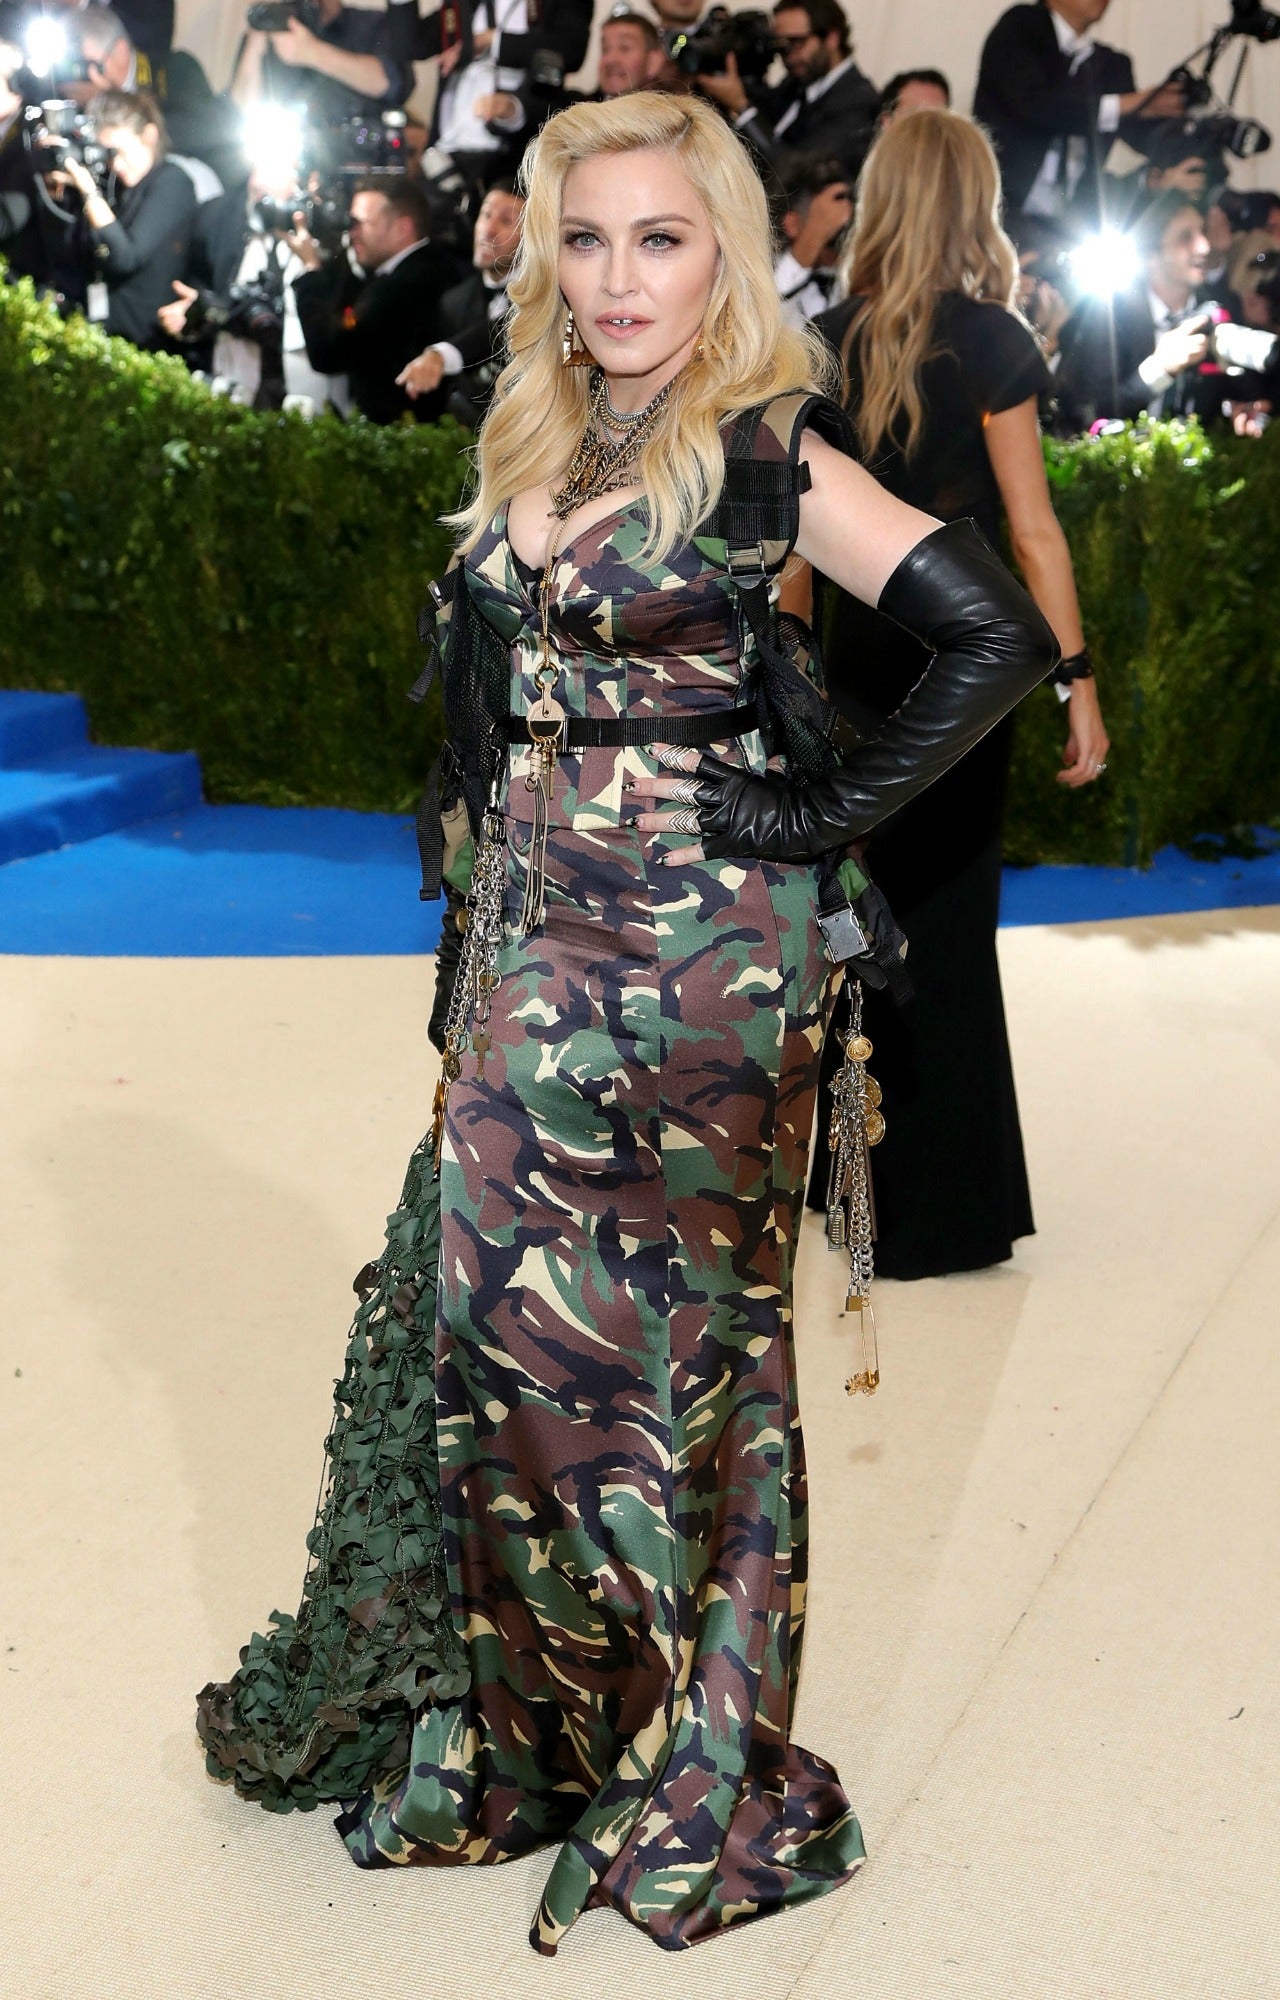 EXCLUSIVE: Madonna Explains Her Crazy Met Gala Army Dress, Reveals She Has Rose in Her ...1280 x 2000